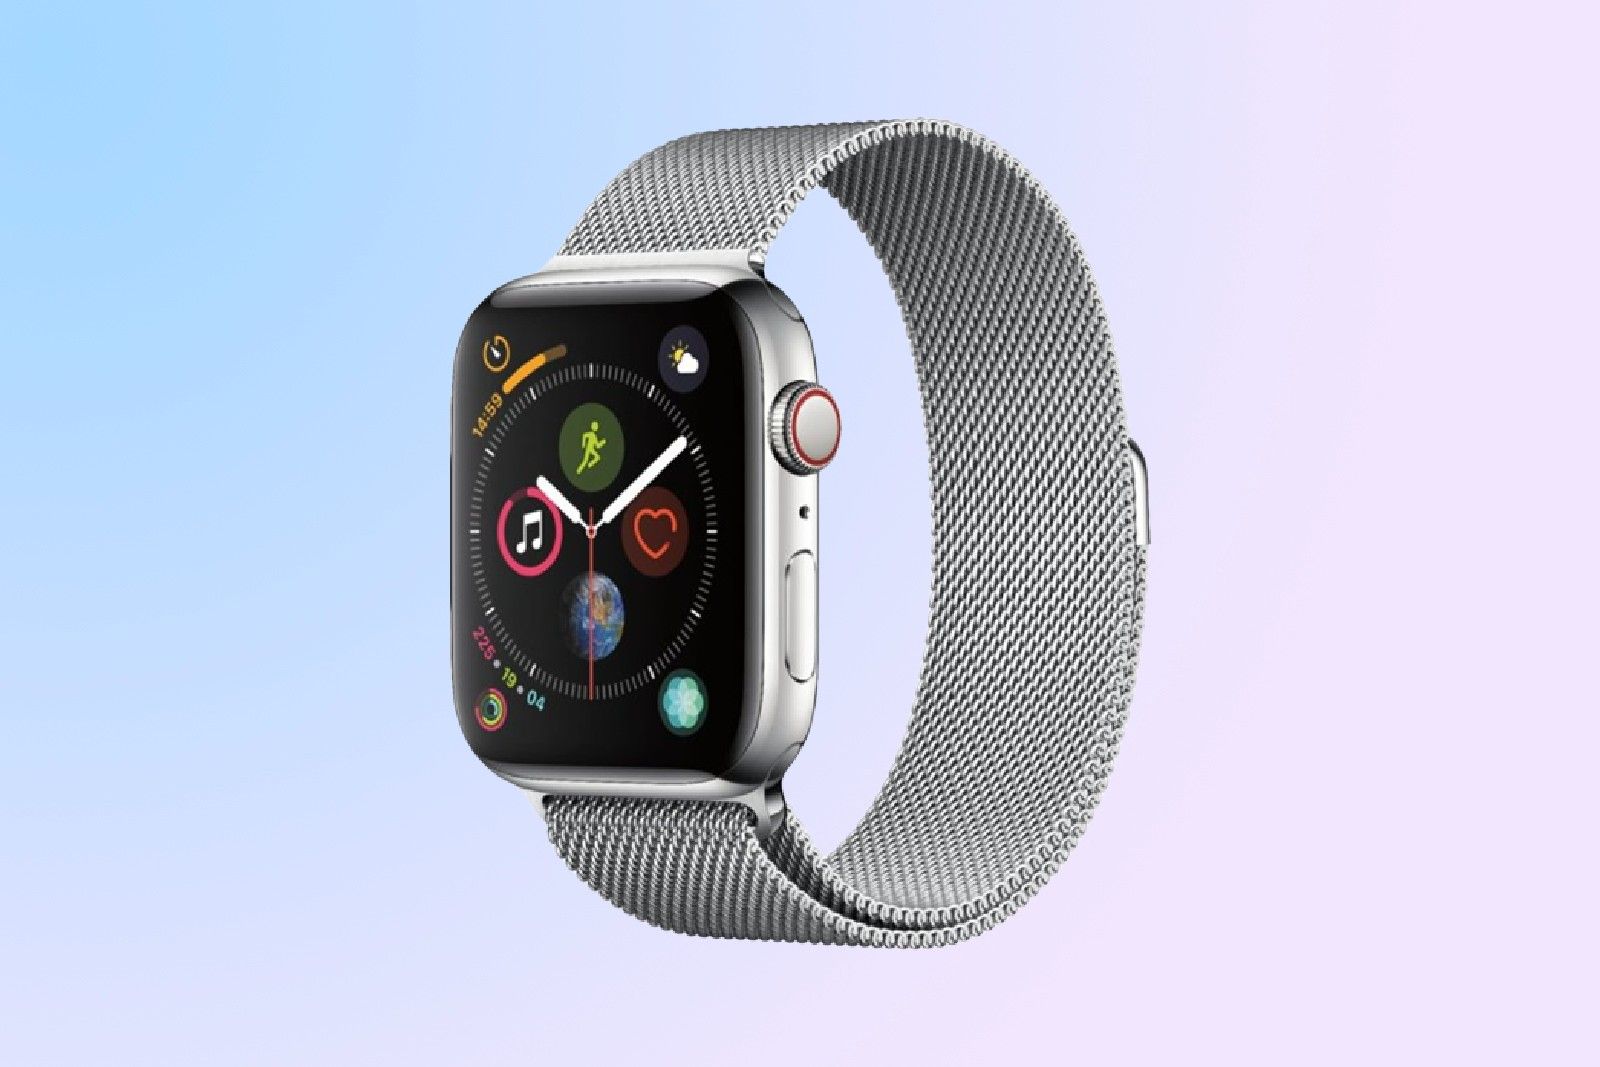 Apple Watch Series 4 (GPS + Cellular) 44mm Stainless Steel Case with Milanese Loop - Stainless Steel